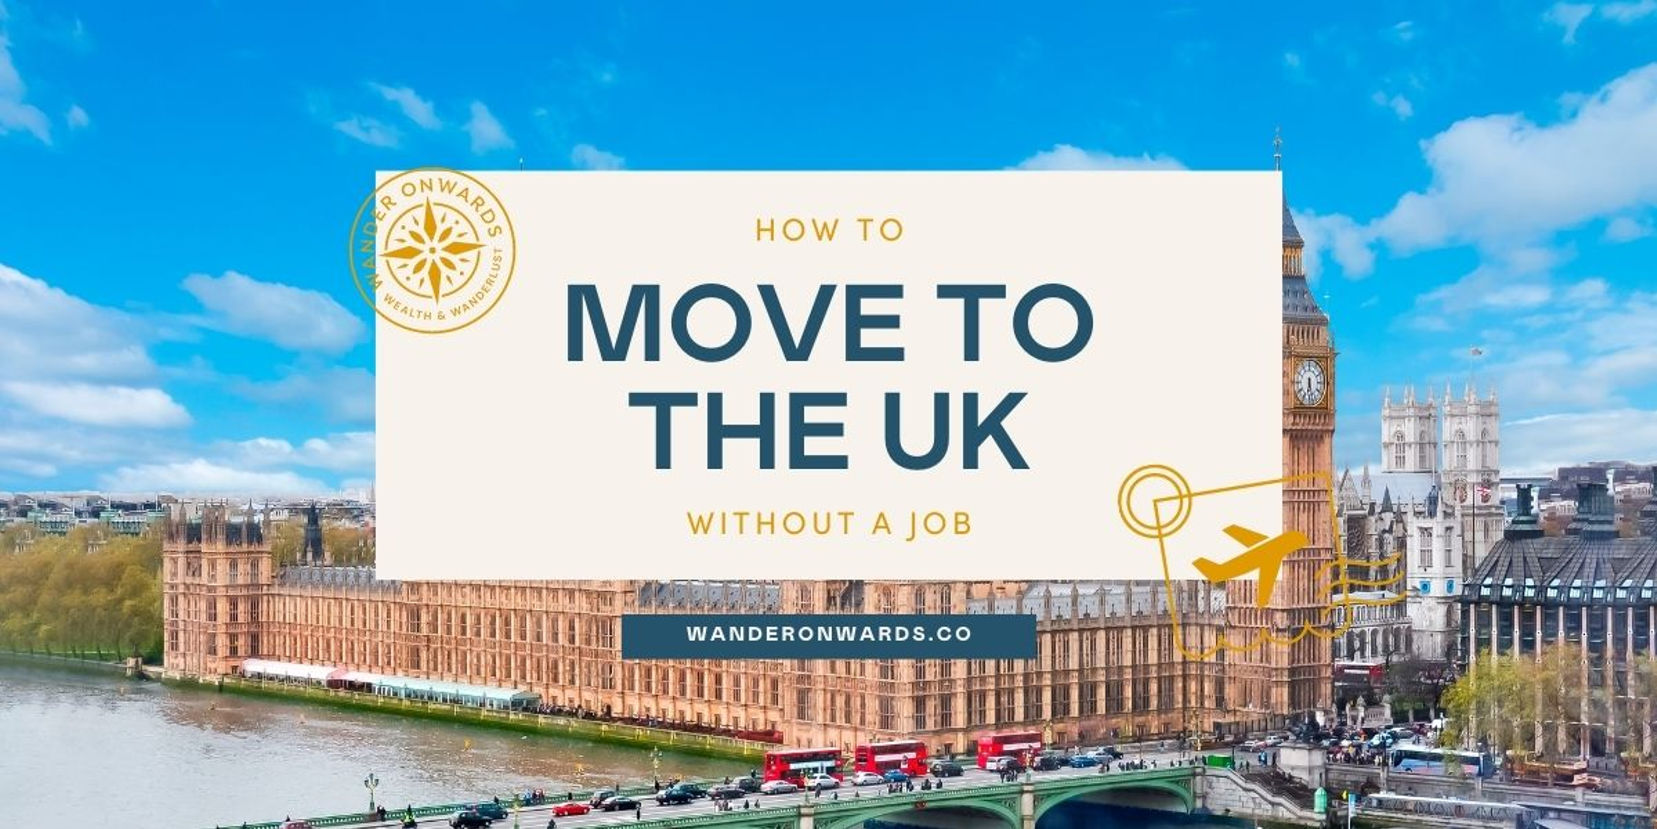 text says "How to move to the UK without a job"